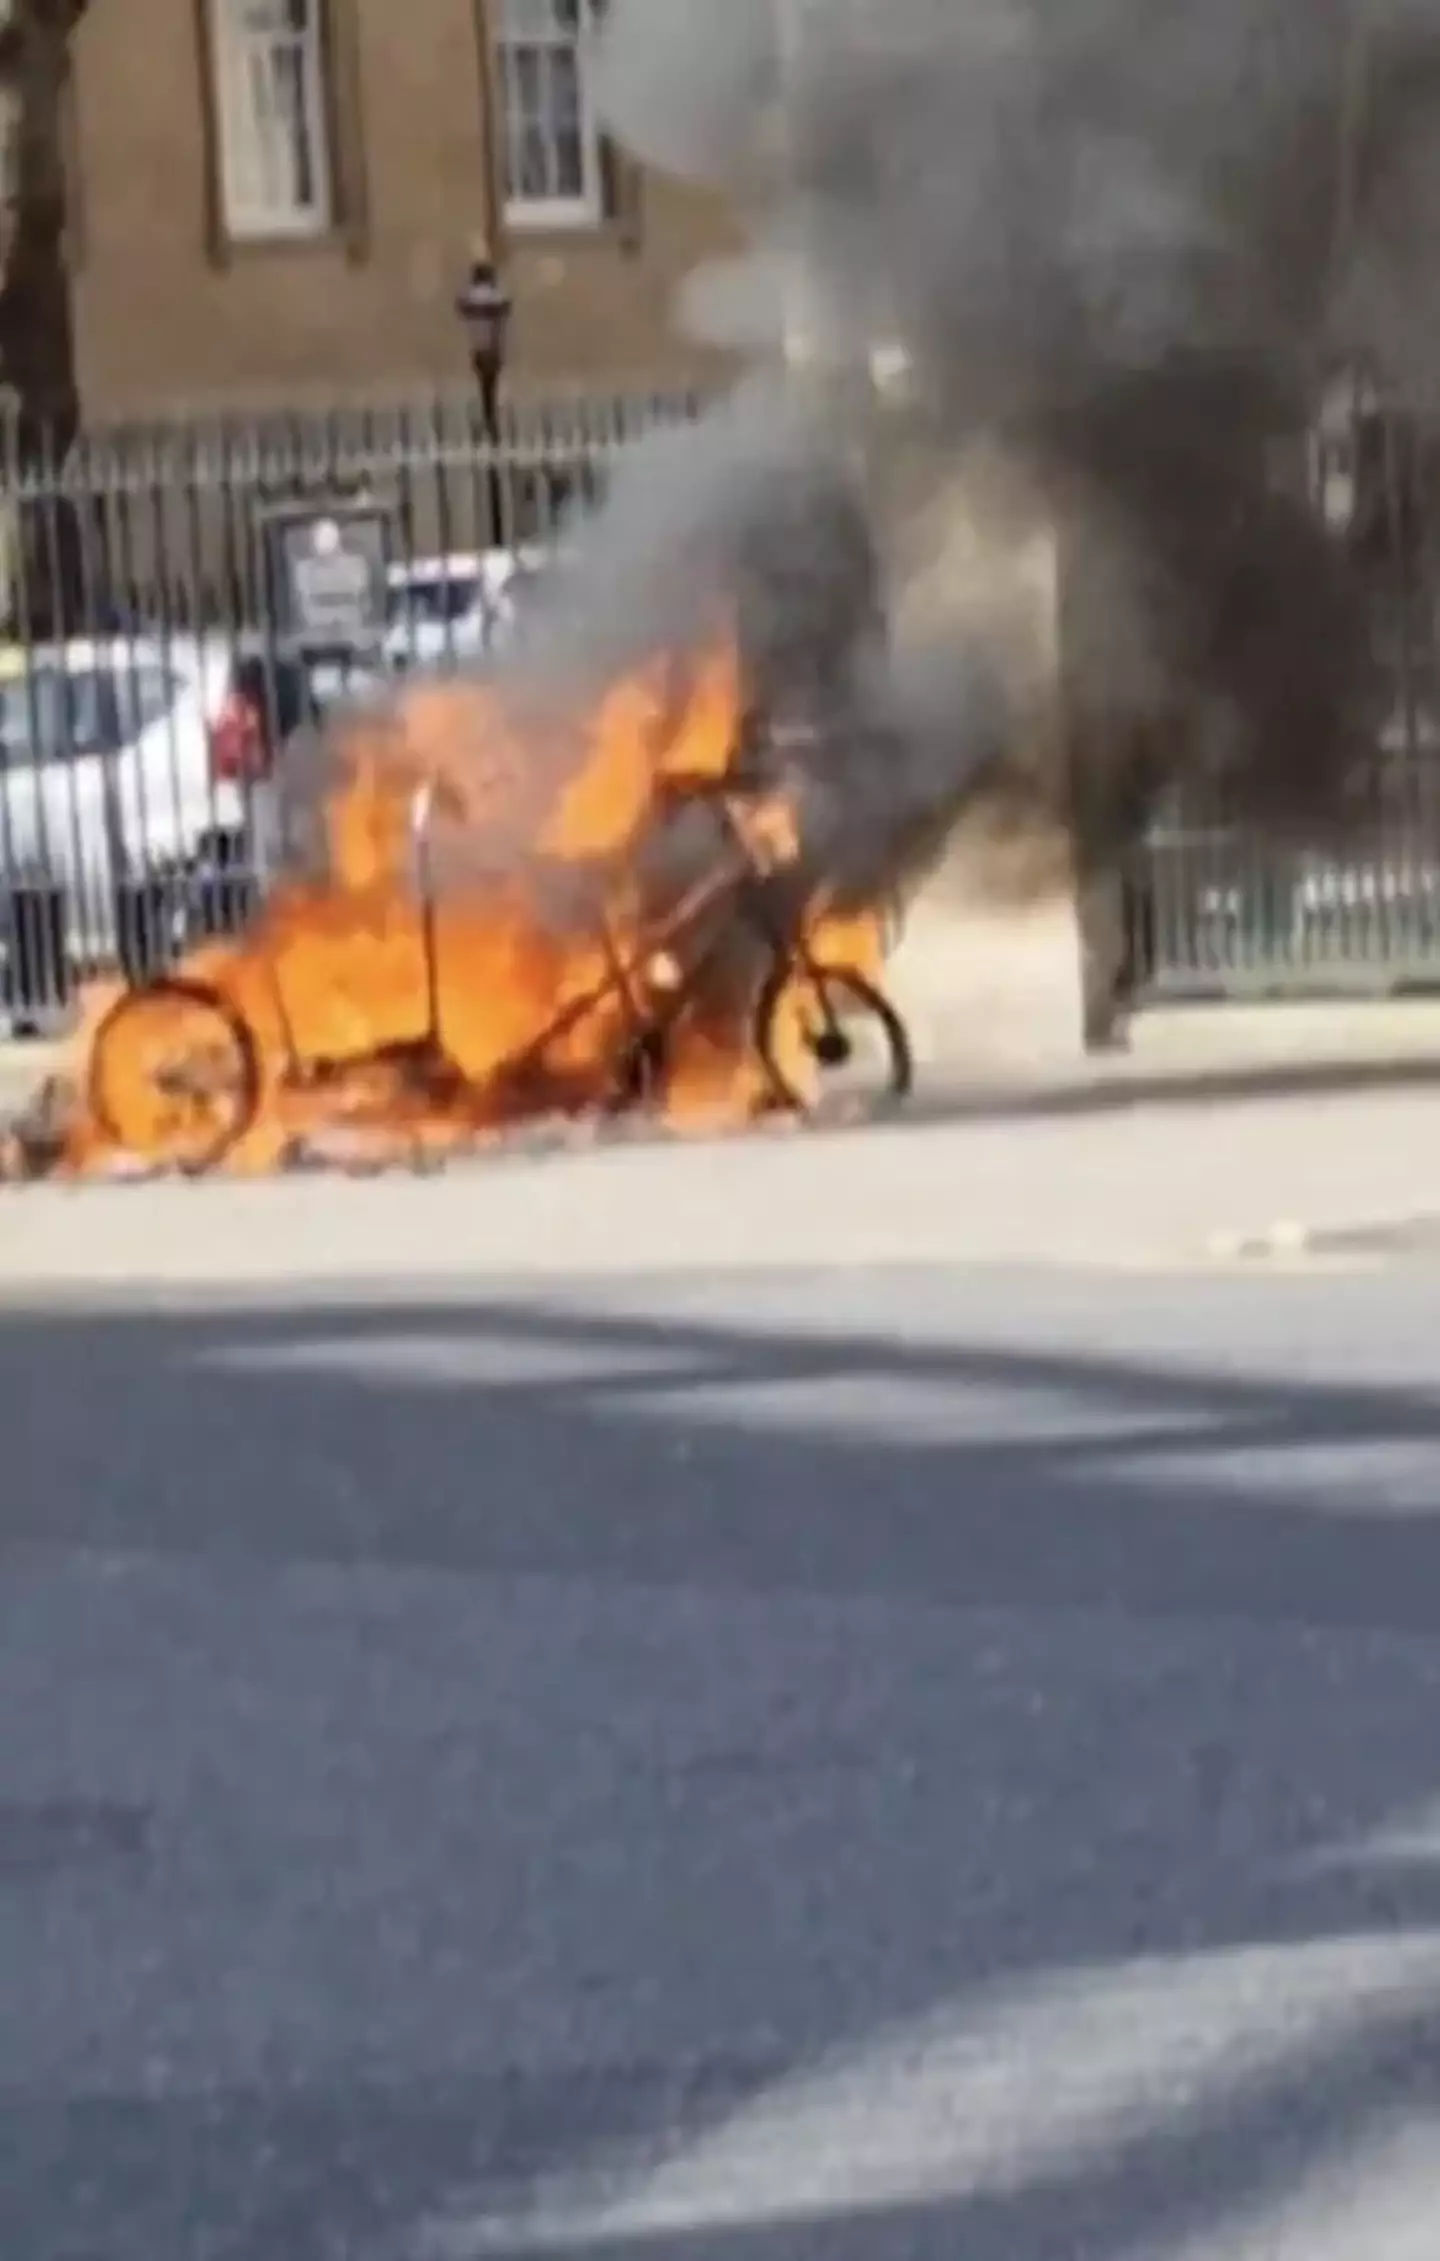 Videos show the pedicab engulfed in flames and billowing black smoke.